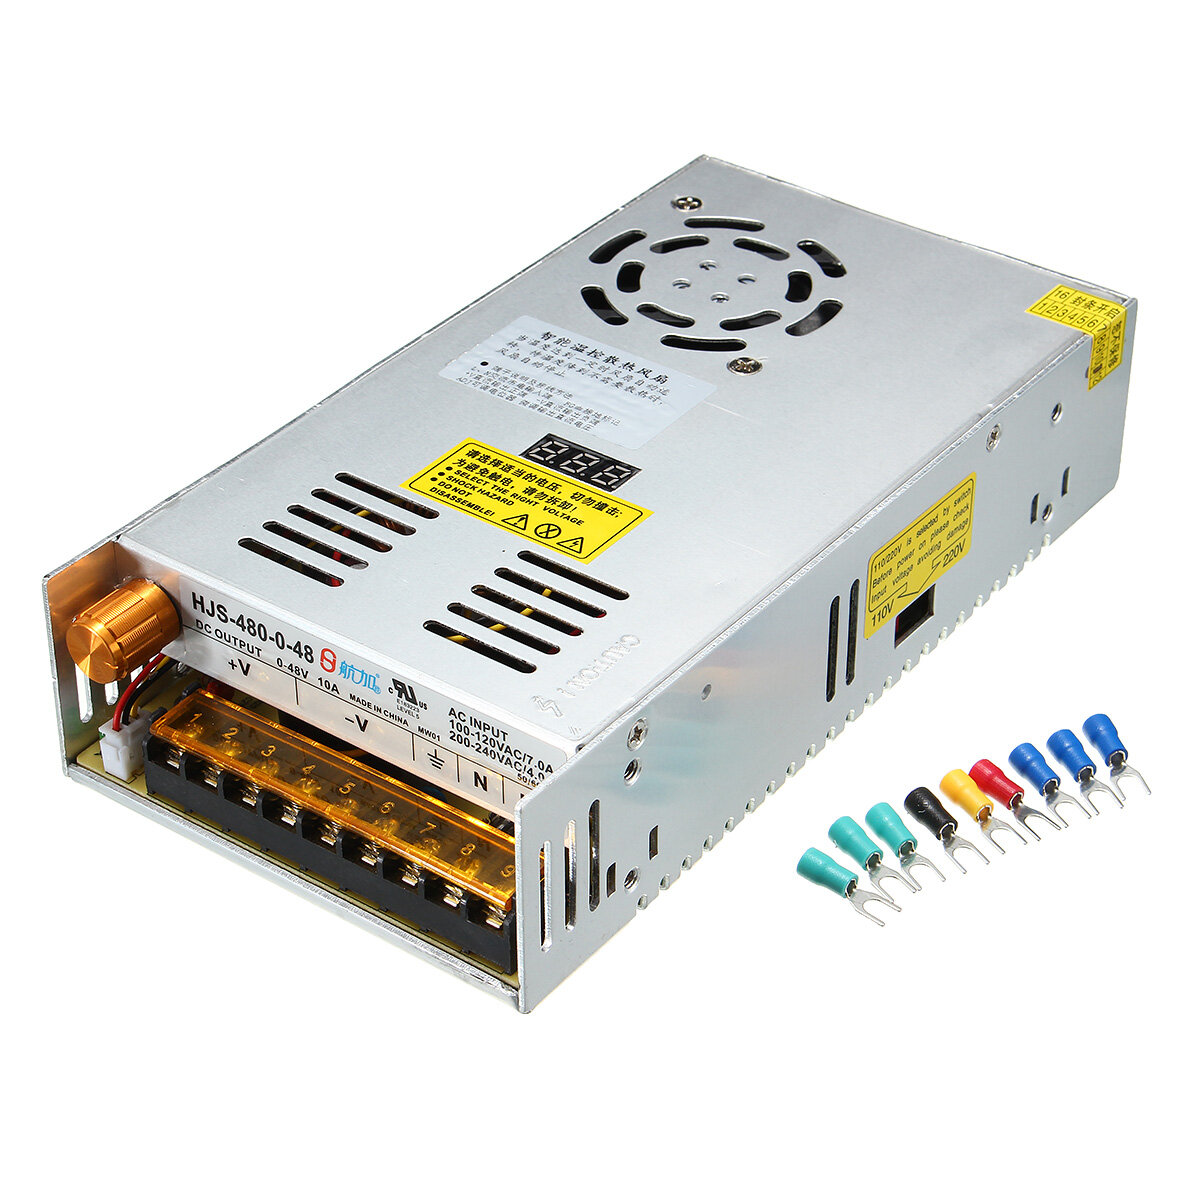 Switching Power Supply AC 110/220V to DC 0-48V 10A 480W Transformer Adjustable with Digital Display